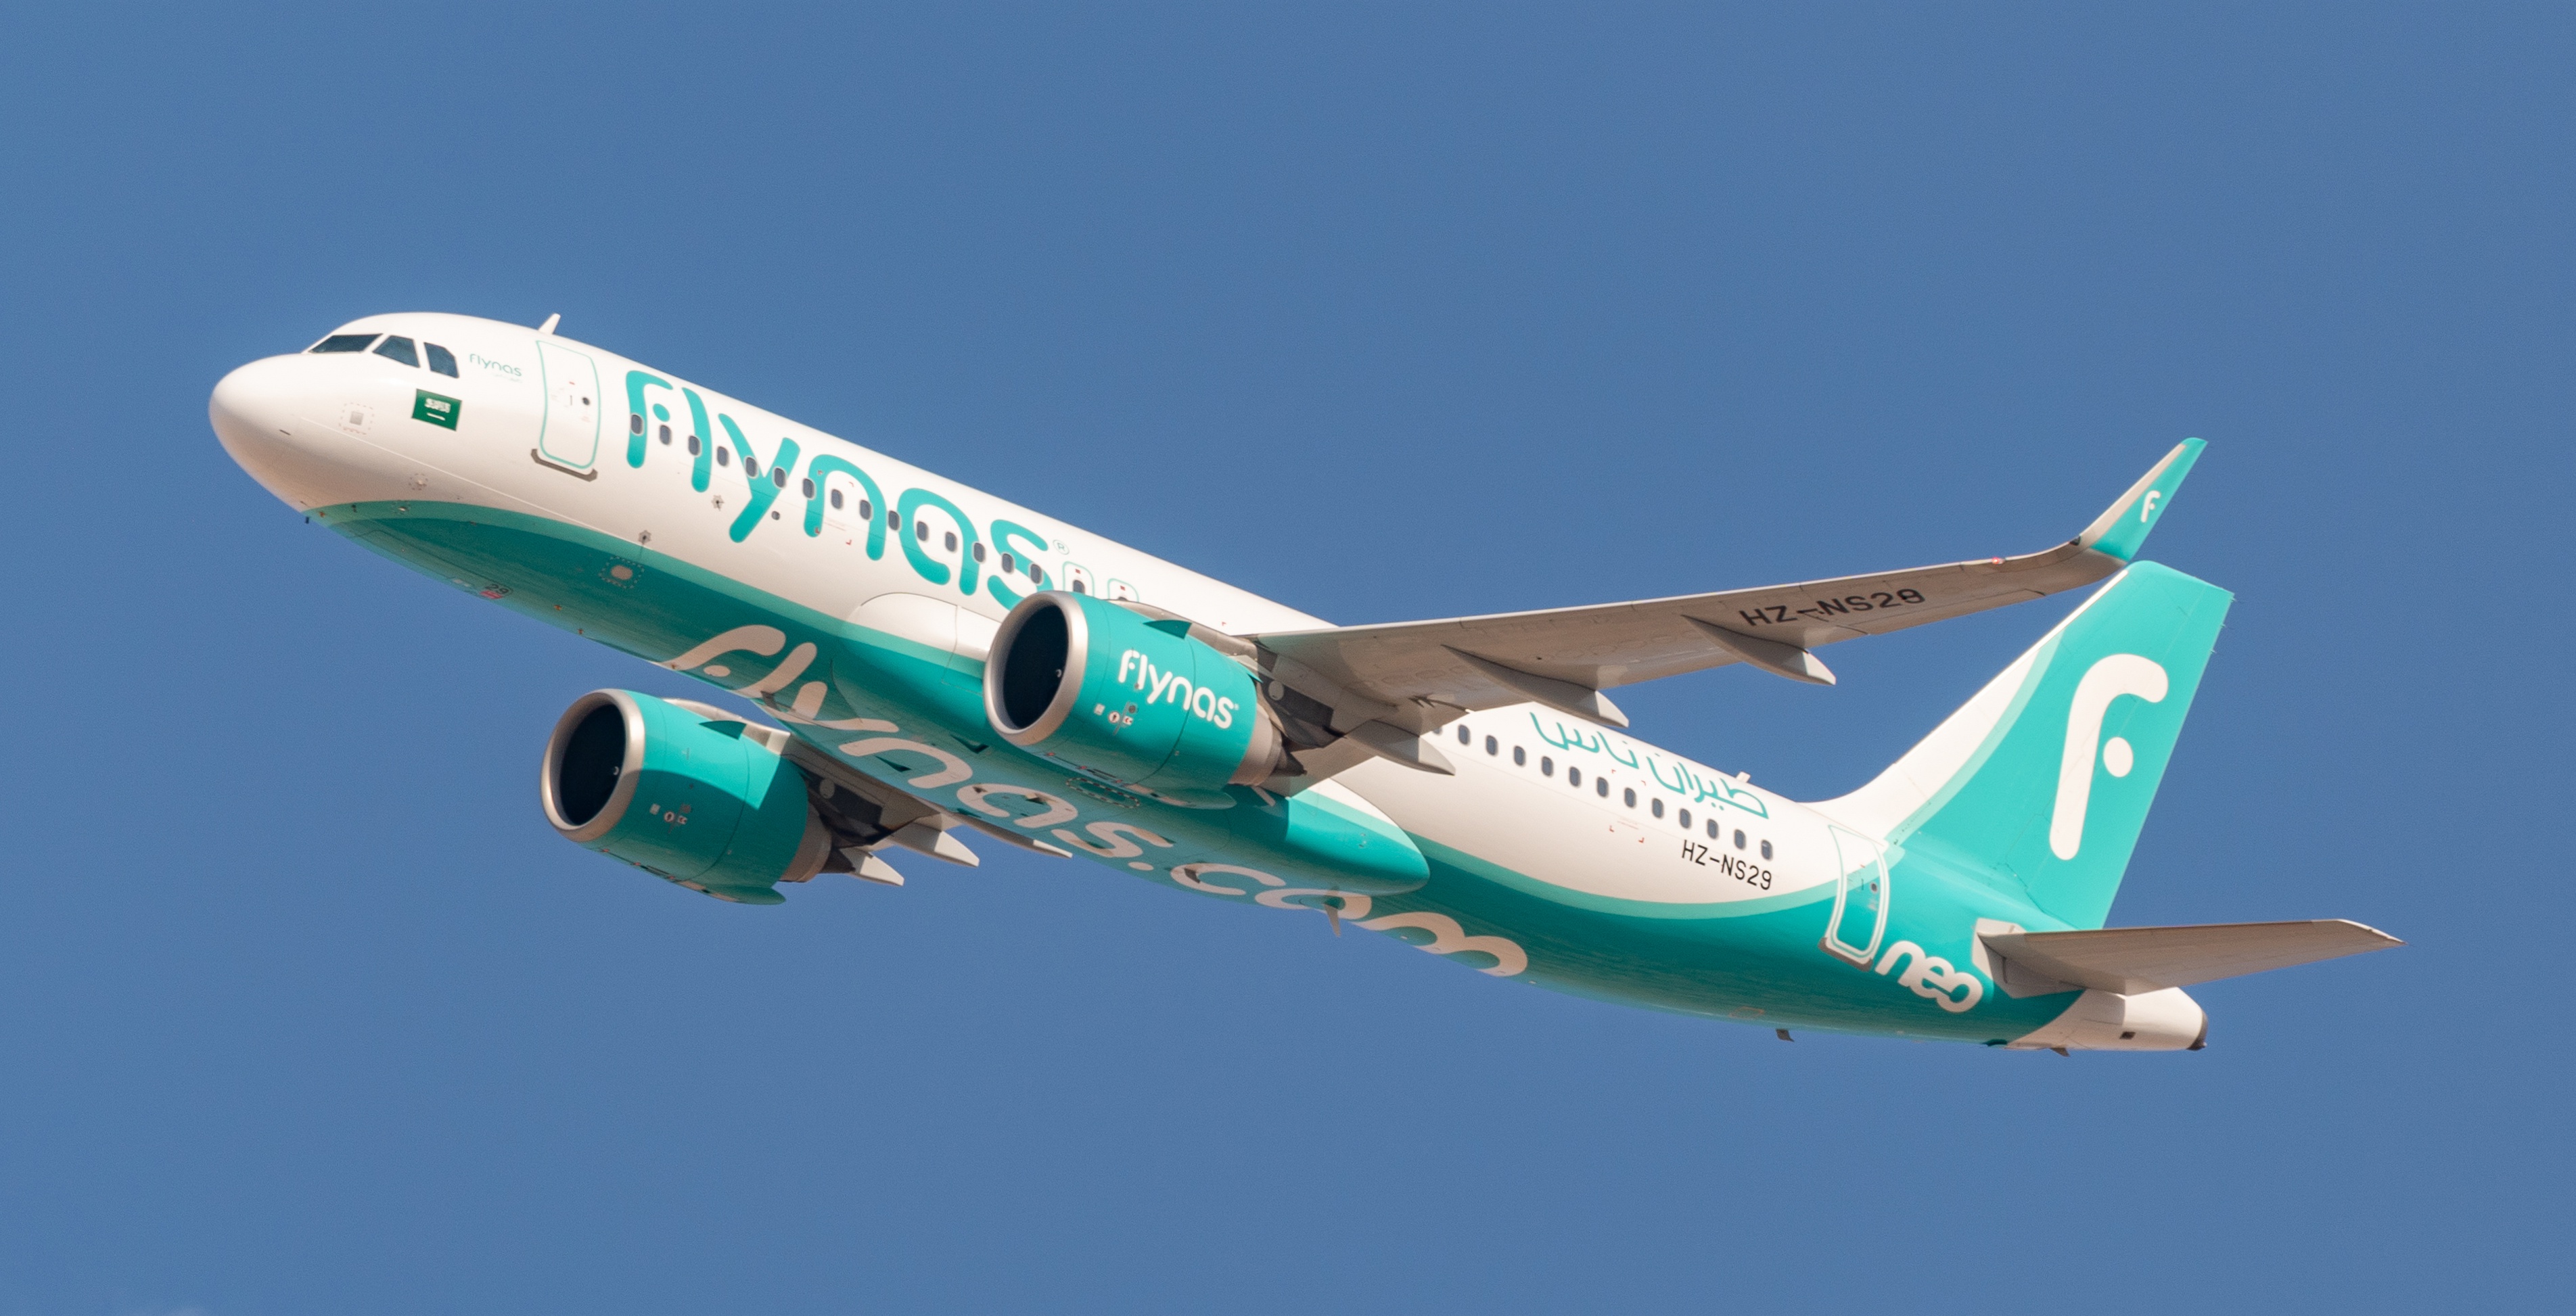 More Than 100,000 Pilgrims From 13 Countries on Board flynas During  1444 AH Hajj Season